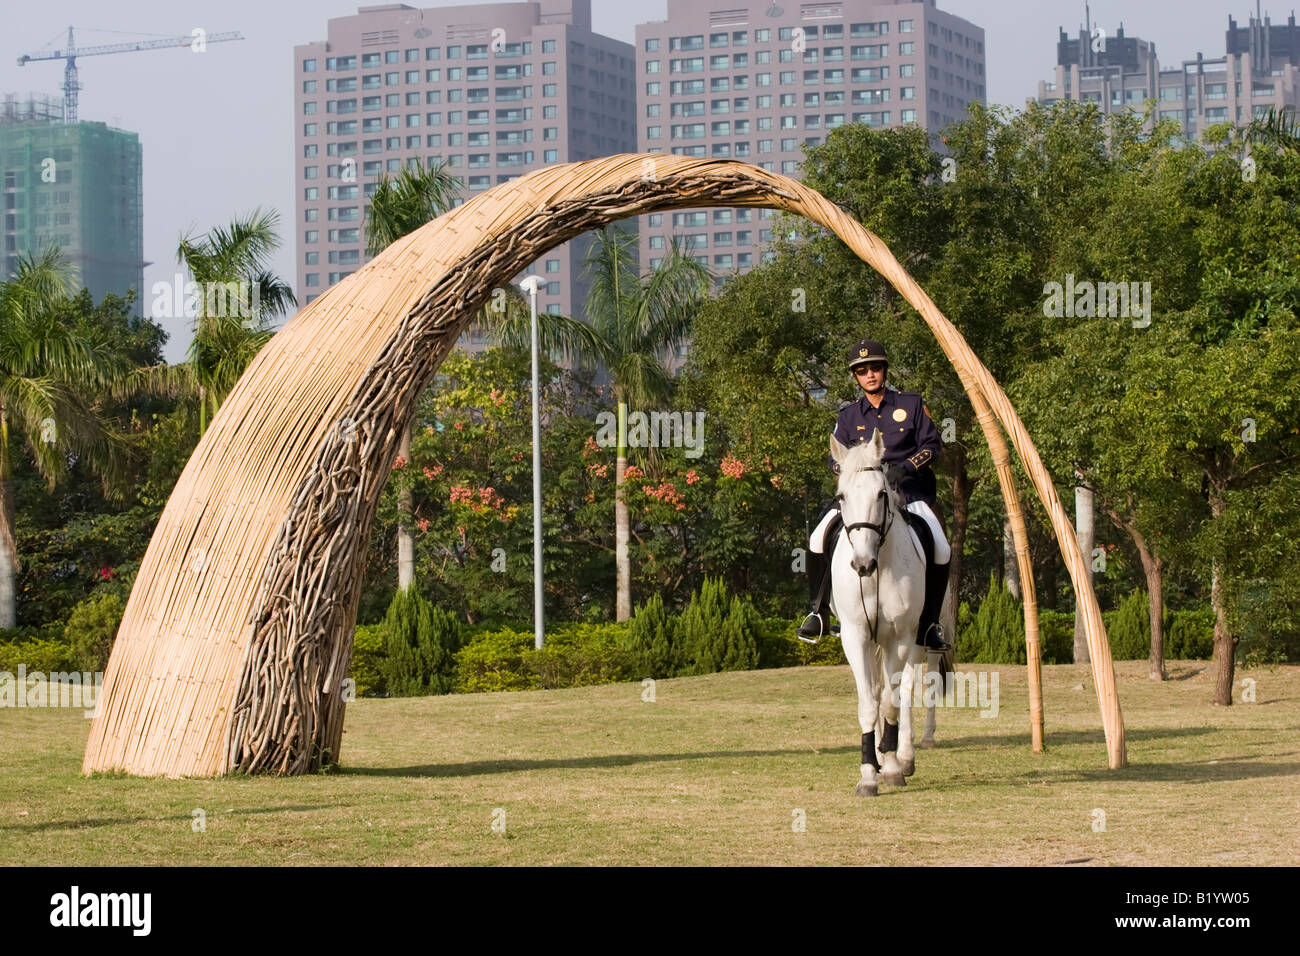 Taiwanese mounted policeman and horse walk under a cane archway, Kaohsiung Museum of Fine Arts, Kaohsiung Taiwan ROC Stock Photo